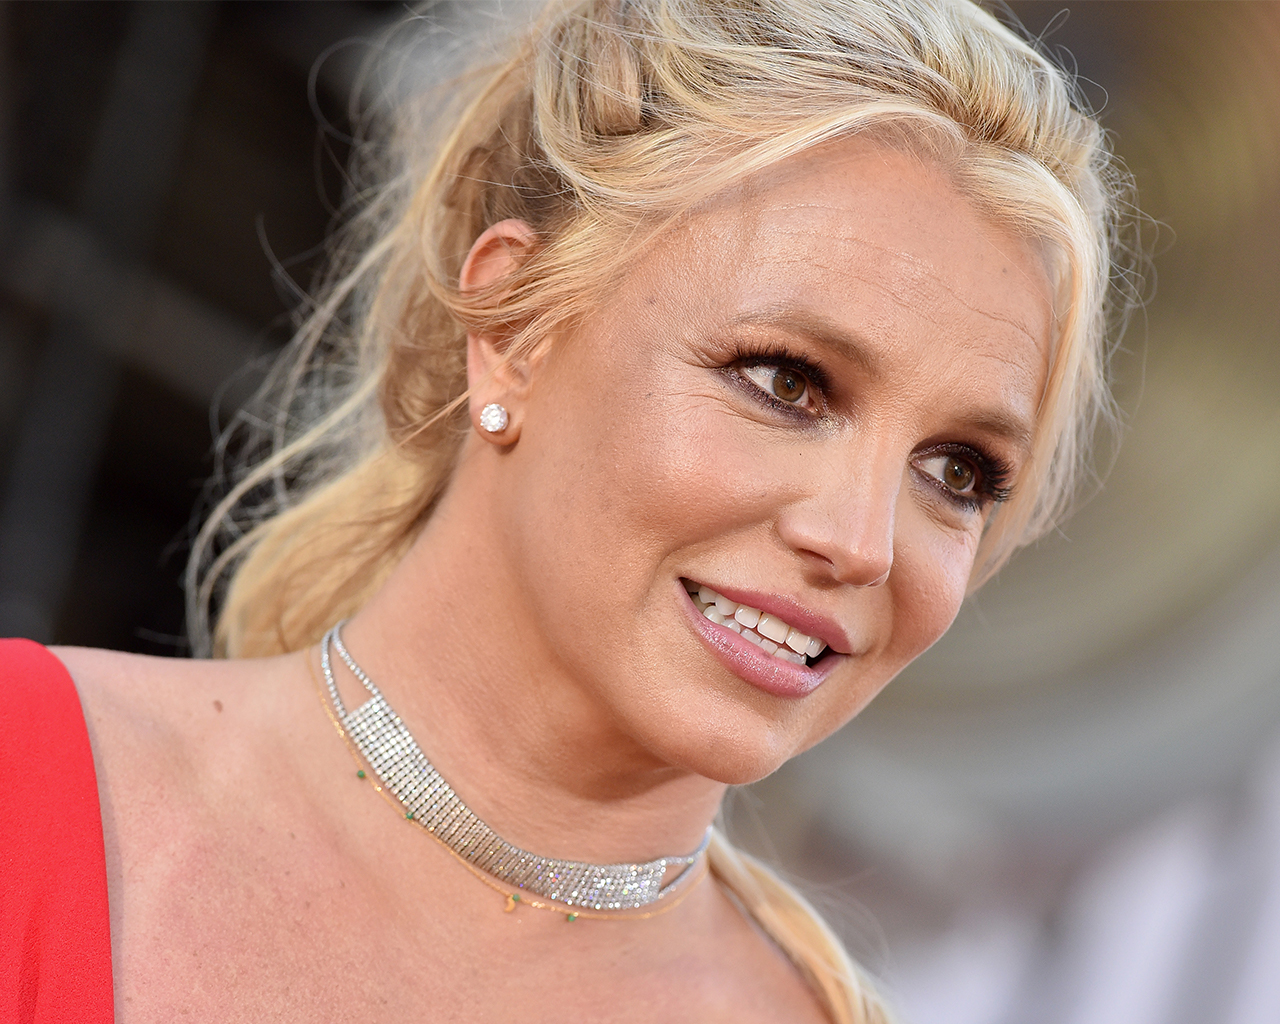 BRITNEY SPEARS HAS FELT HER CONSERVATORSHIP IS AN ‘OPPRESSIVE AND CONTROLLING TOOL AGAINST HER’ FOR YEARS